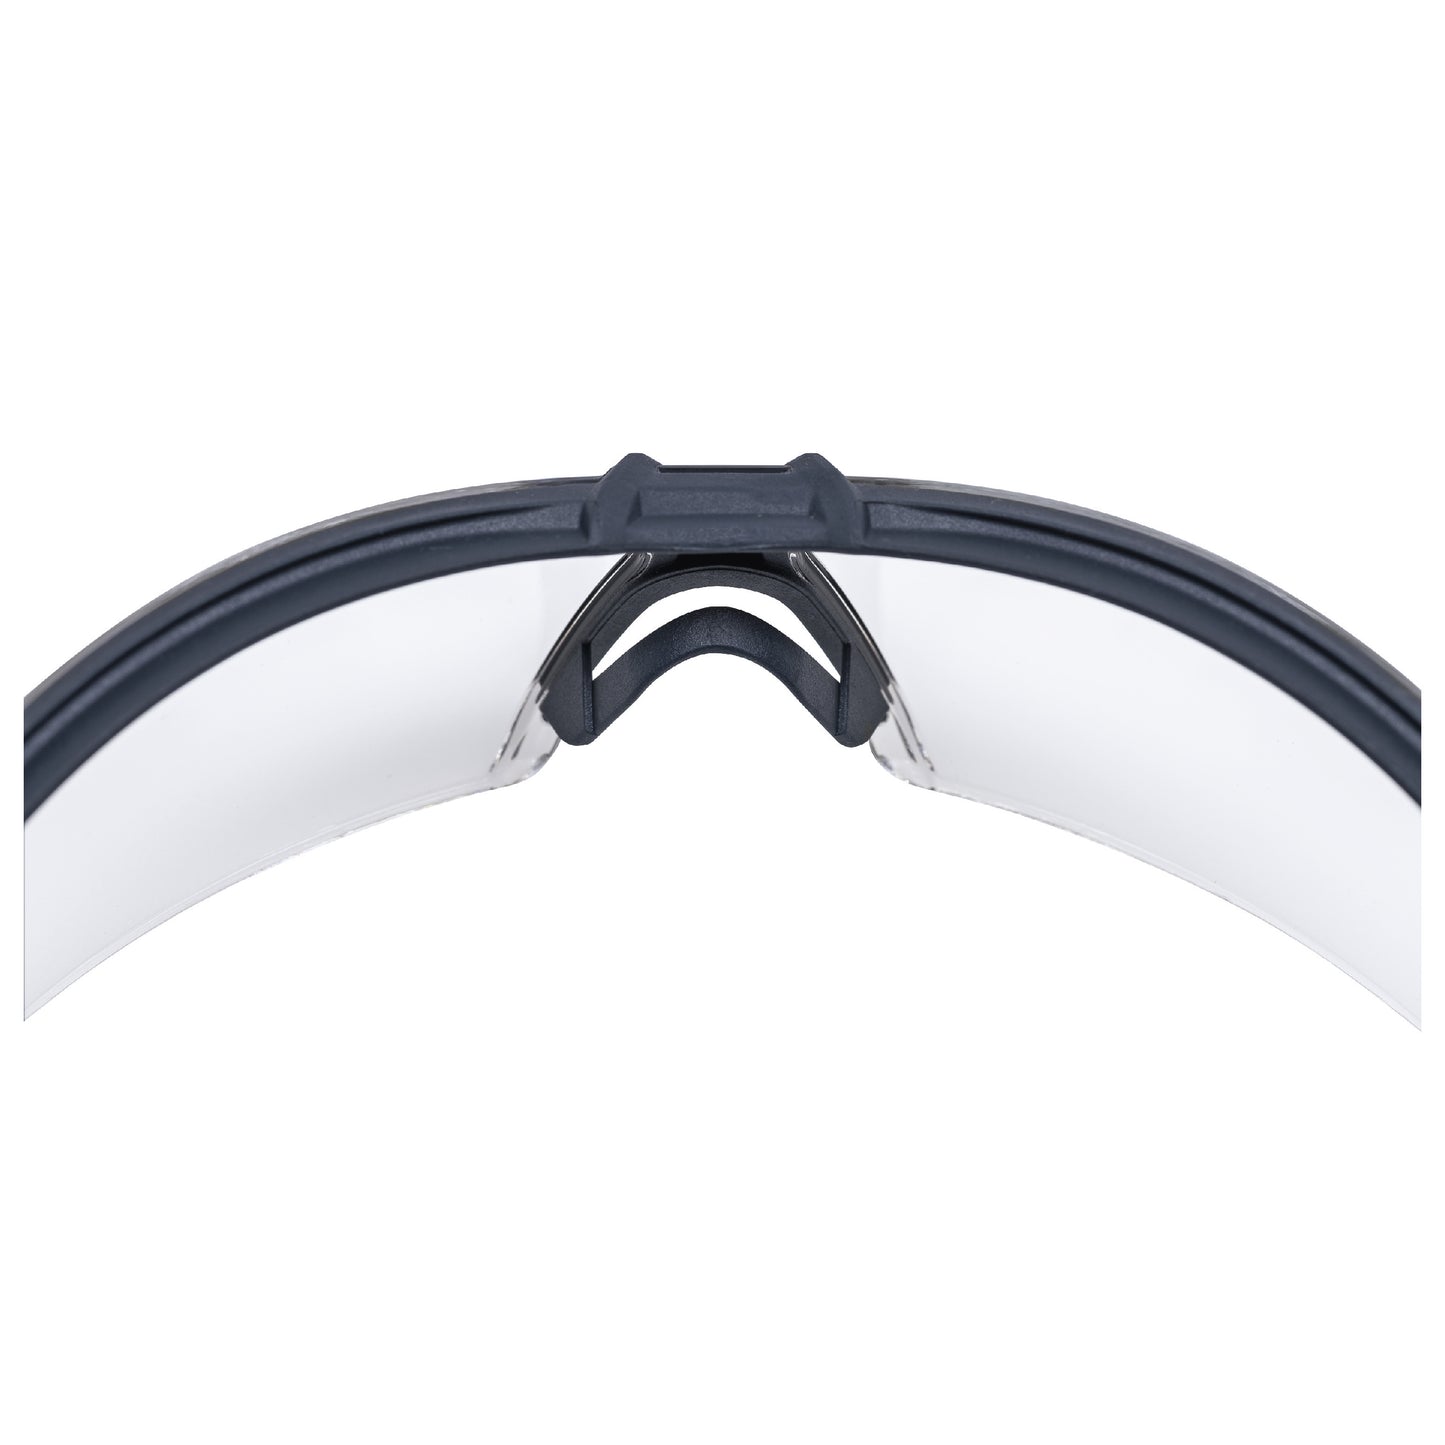 uvex i-5 Safety Spectacles Clear Lens